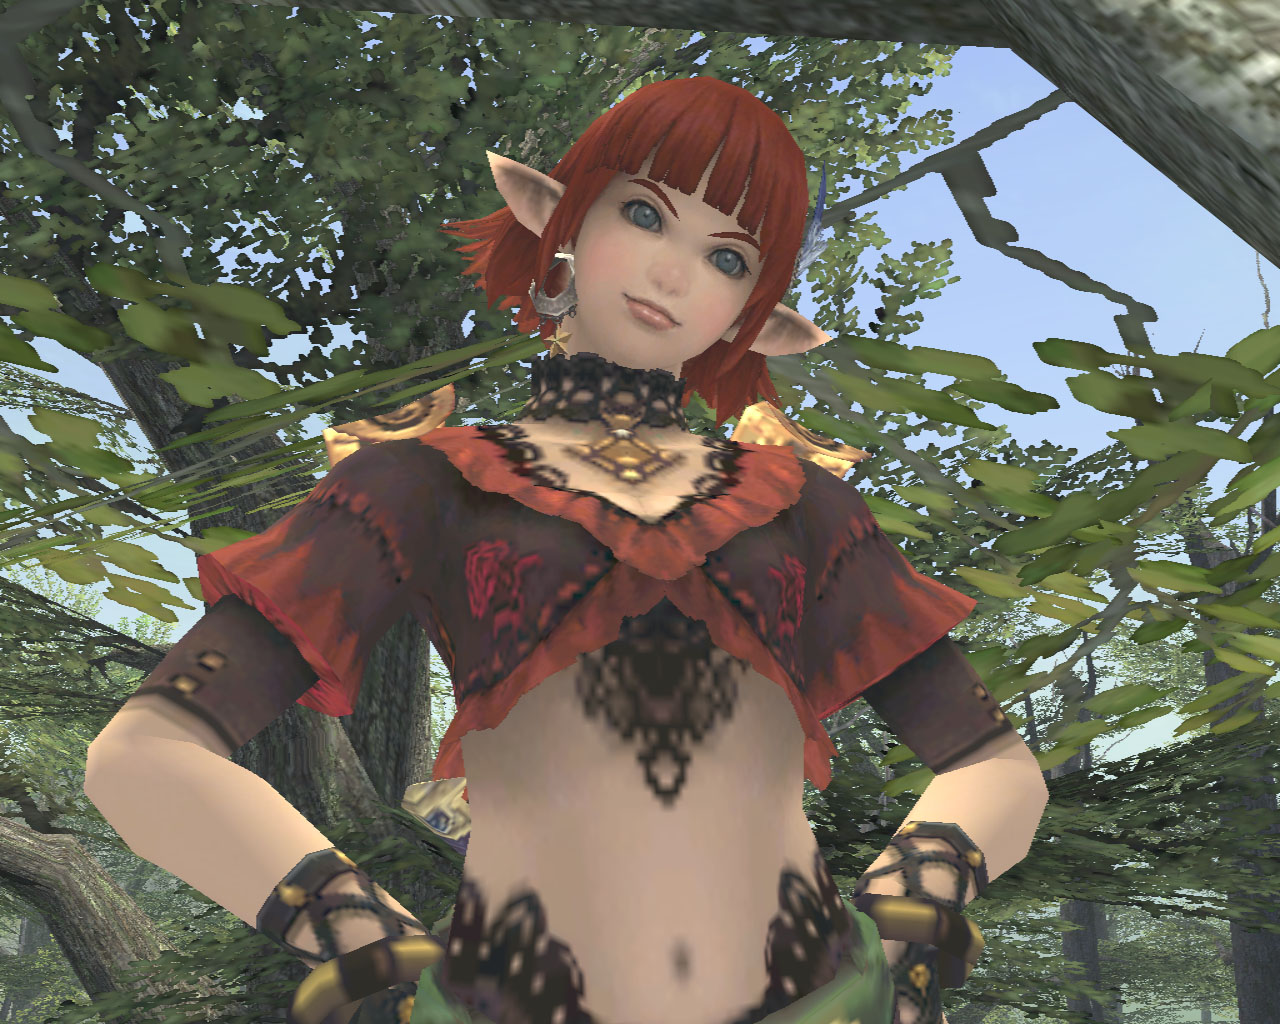 How long is Final Fantasy XI: Wings of the Goddess DLC?